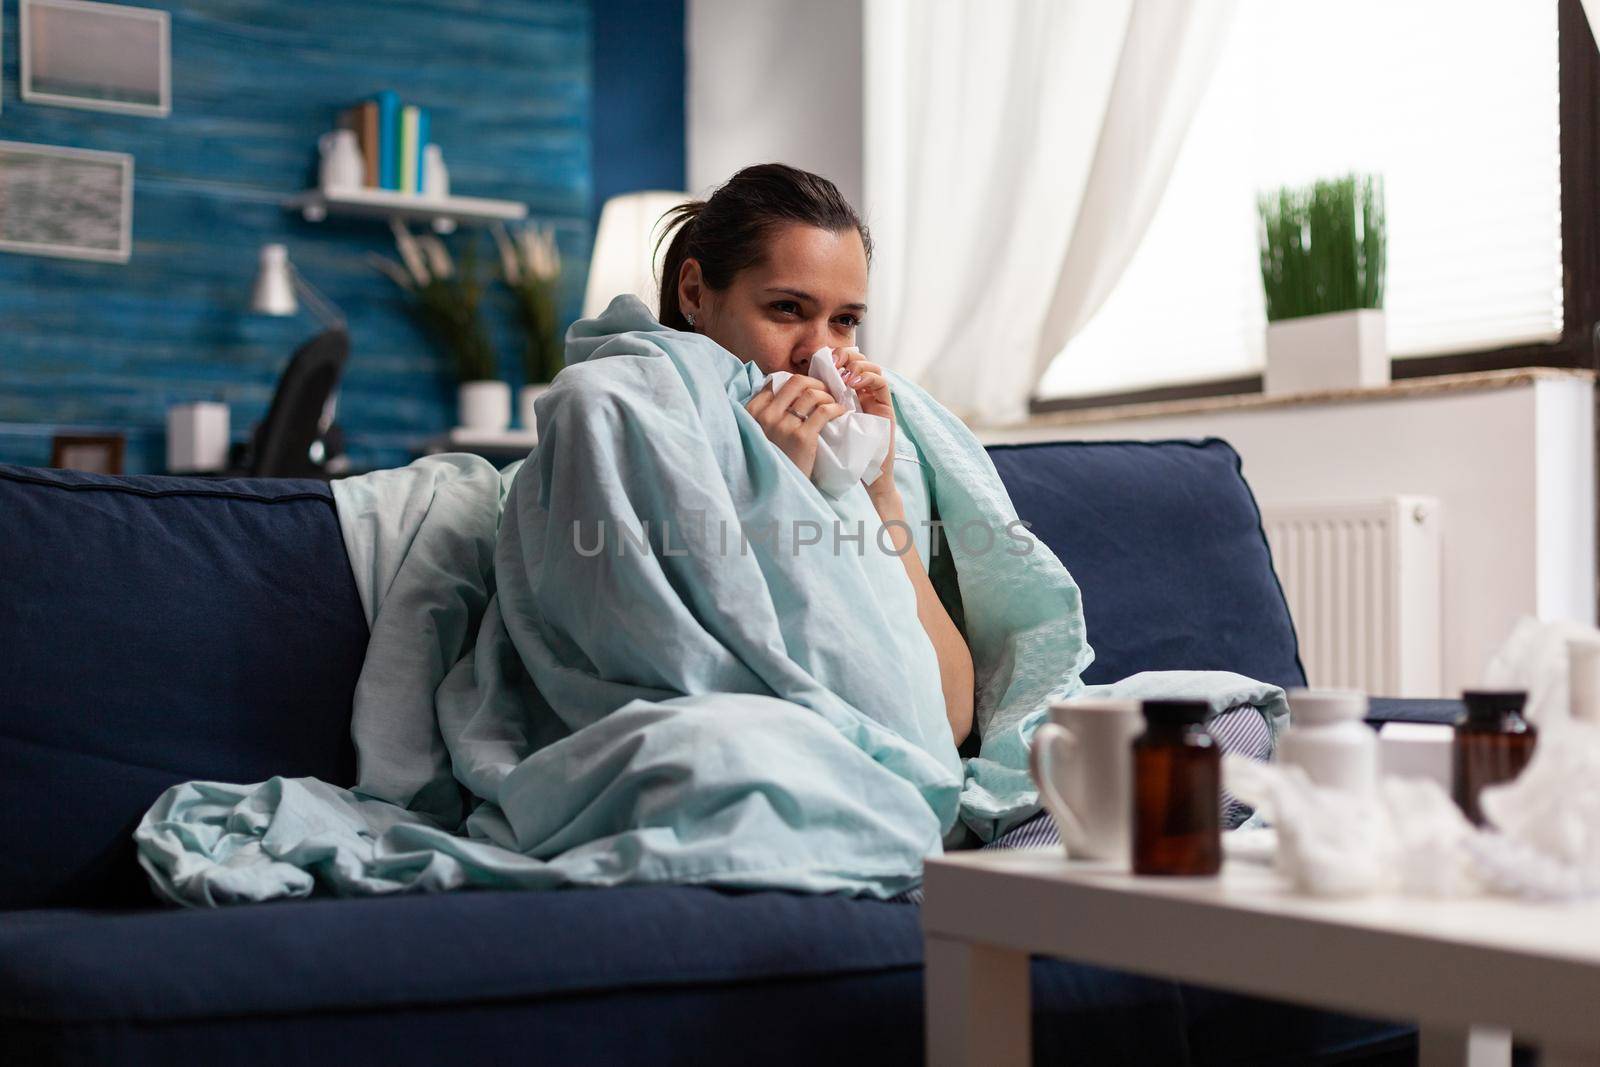 Woman with sickness wrapped in blanket at home ill by DCStudio